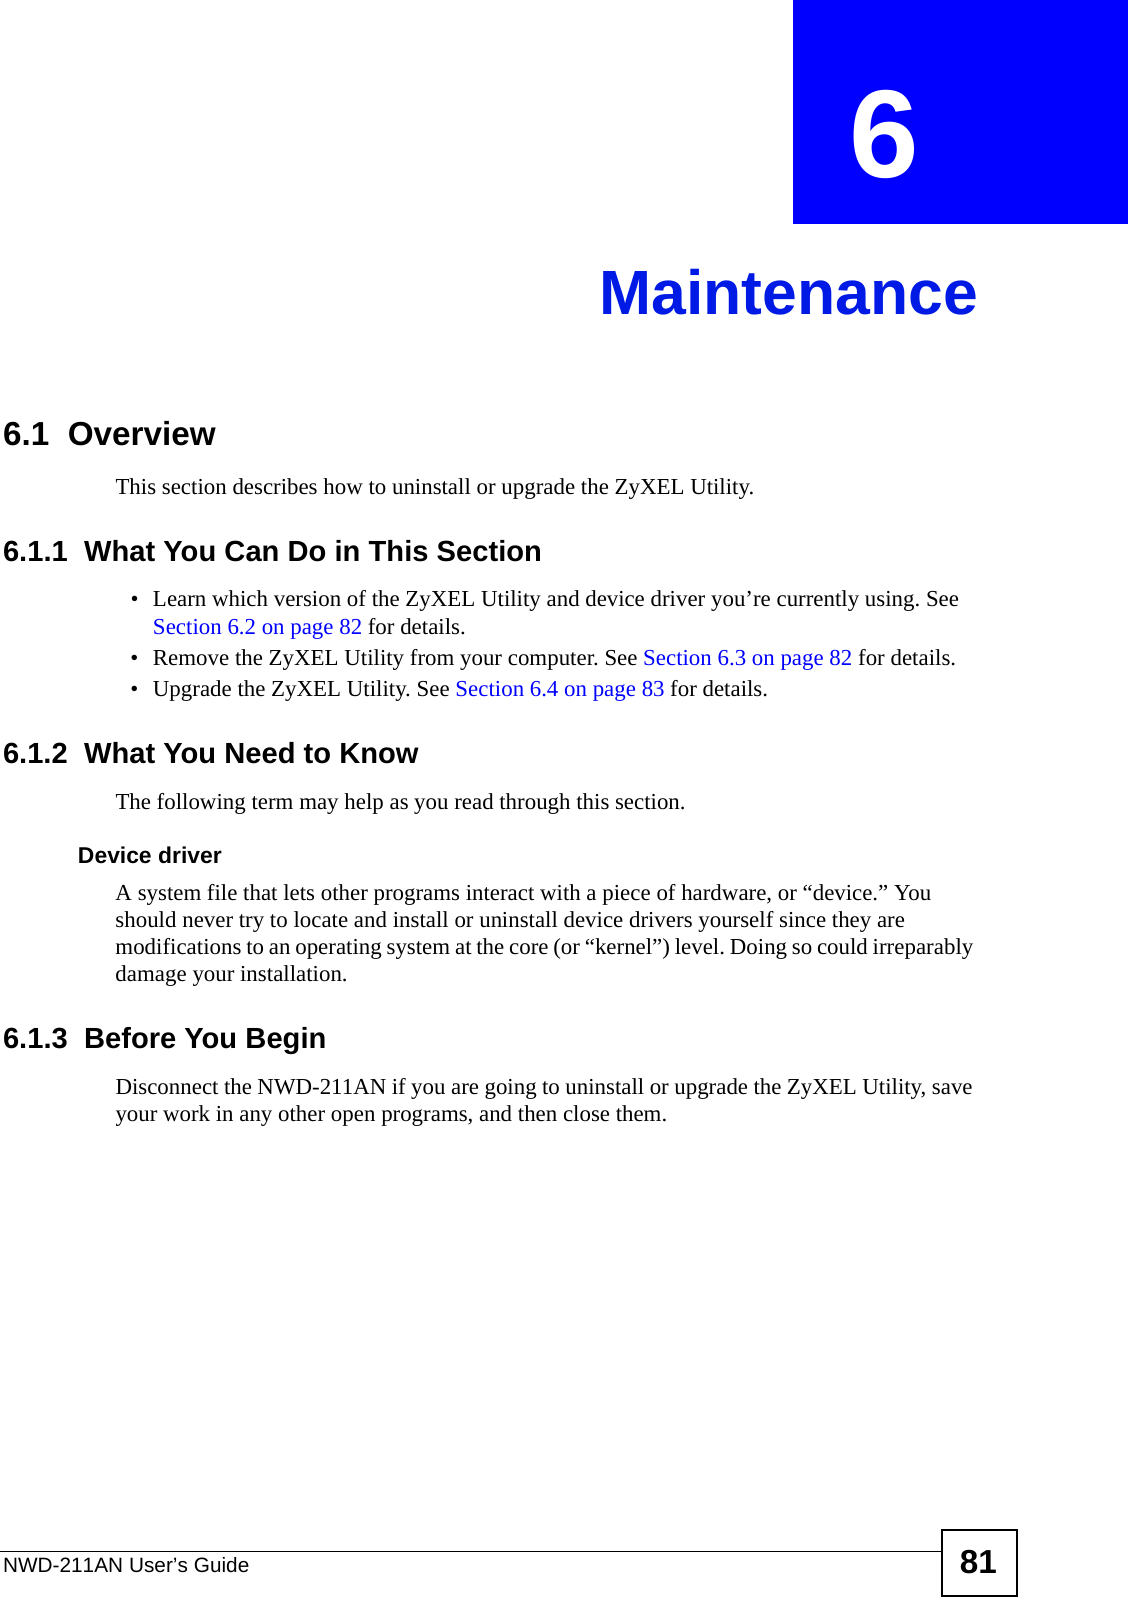 NWD-211AN User’s Guide 81CHAPTER  6 Maintenance6.1  OverviewThis section describes how to uninstall or upgrade the ZyXEL Utility.6.1.1  What You Can Do in This Section• Learn which version of the ZyXEL Utility and device driver you’re currently using. See Section 6.2 on page 82 for details.• Remove the ZyXEL Utility from your computer. See Section 6.3 on page 82 for details.• Upgrade the ZyXEL Utility. See Section 6.4 on page 83 for details.6.1.2  What You Need to KnowThe following term may help as you read through this section.Device driverA system file that lets other programs interact with a piece of hardware, or “device.” You should never try to locate and install or uninstall device drivers yourself since they are modifications to an operating system at the core (or “kernel”) level. Doing so could irreparably damage your installation.6.1.3  Before You BeginDisconnect the NWD-211AN if you are going to uninstall or upgrade the ZyXEL Utility, save your work in any other open programs, and then close them.